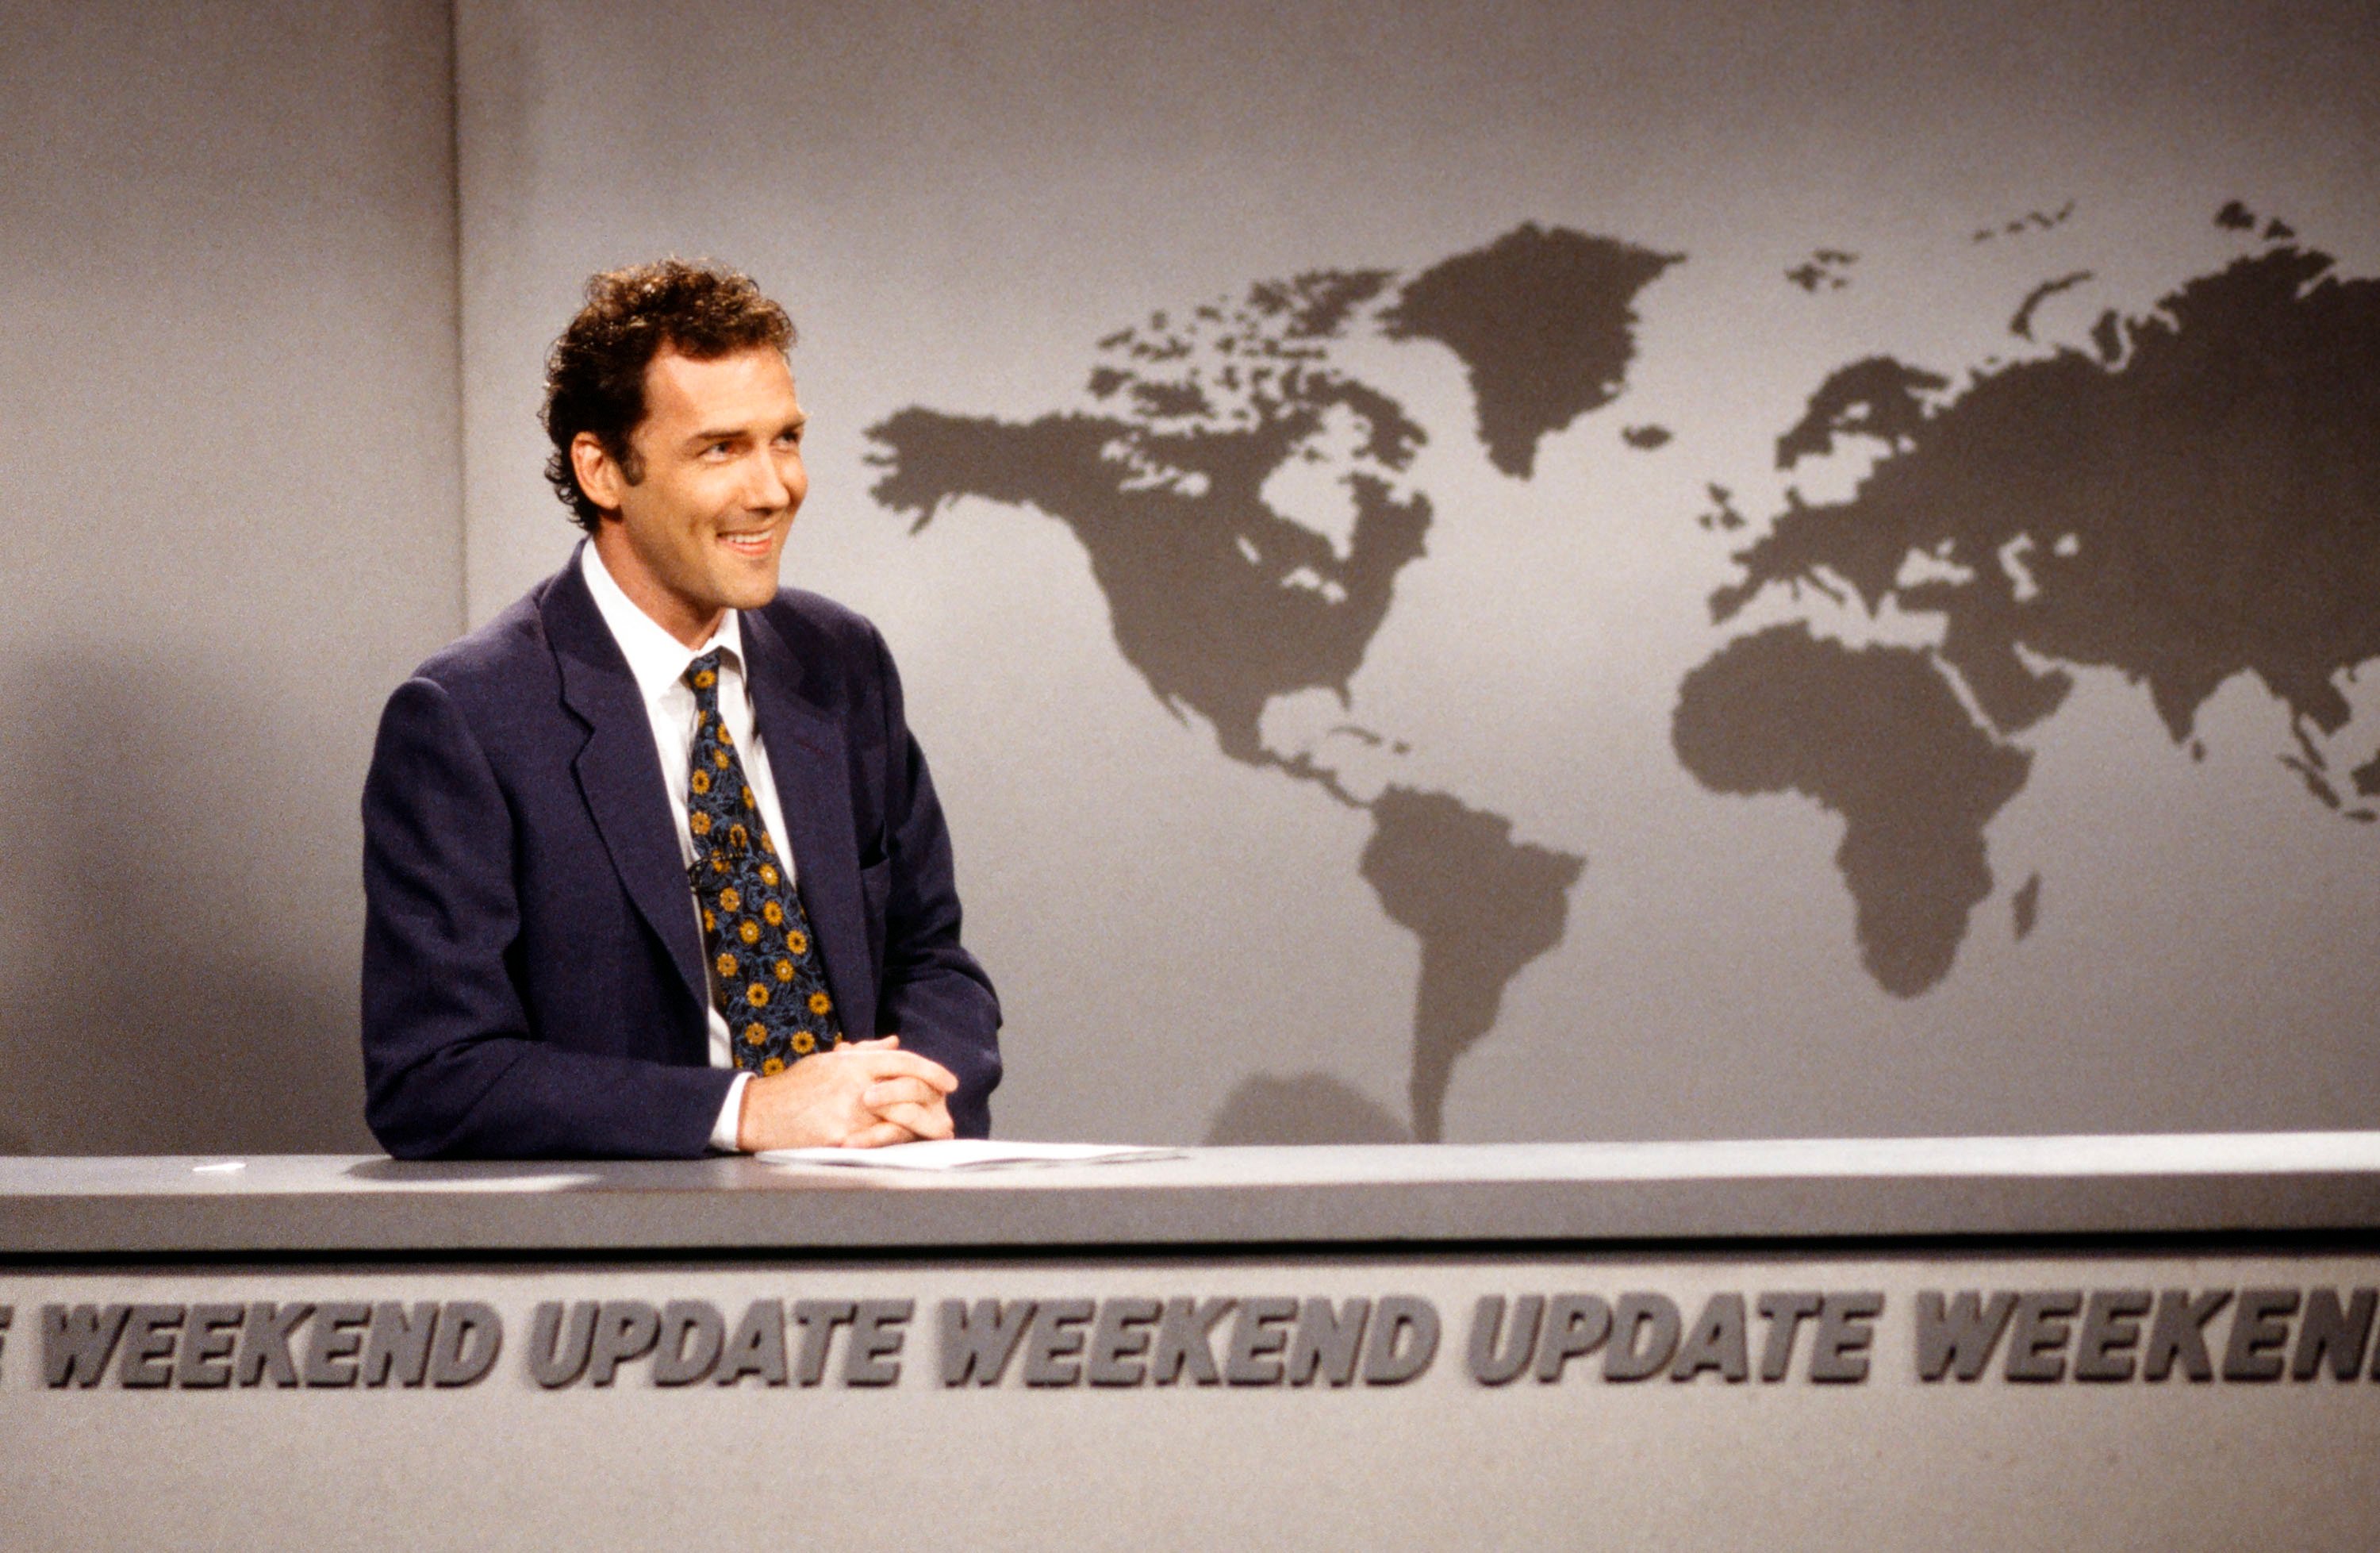 Norm MacDonald during the 'Weekend Update' skit on 'Saturday Night Live'